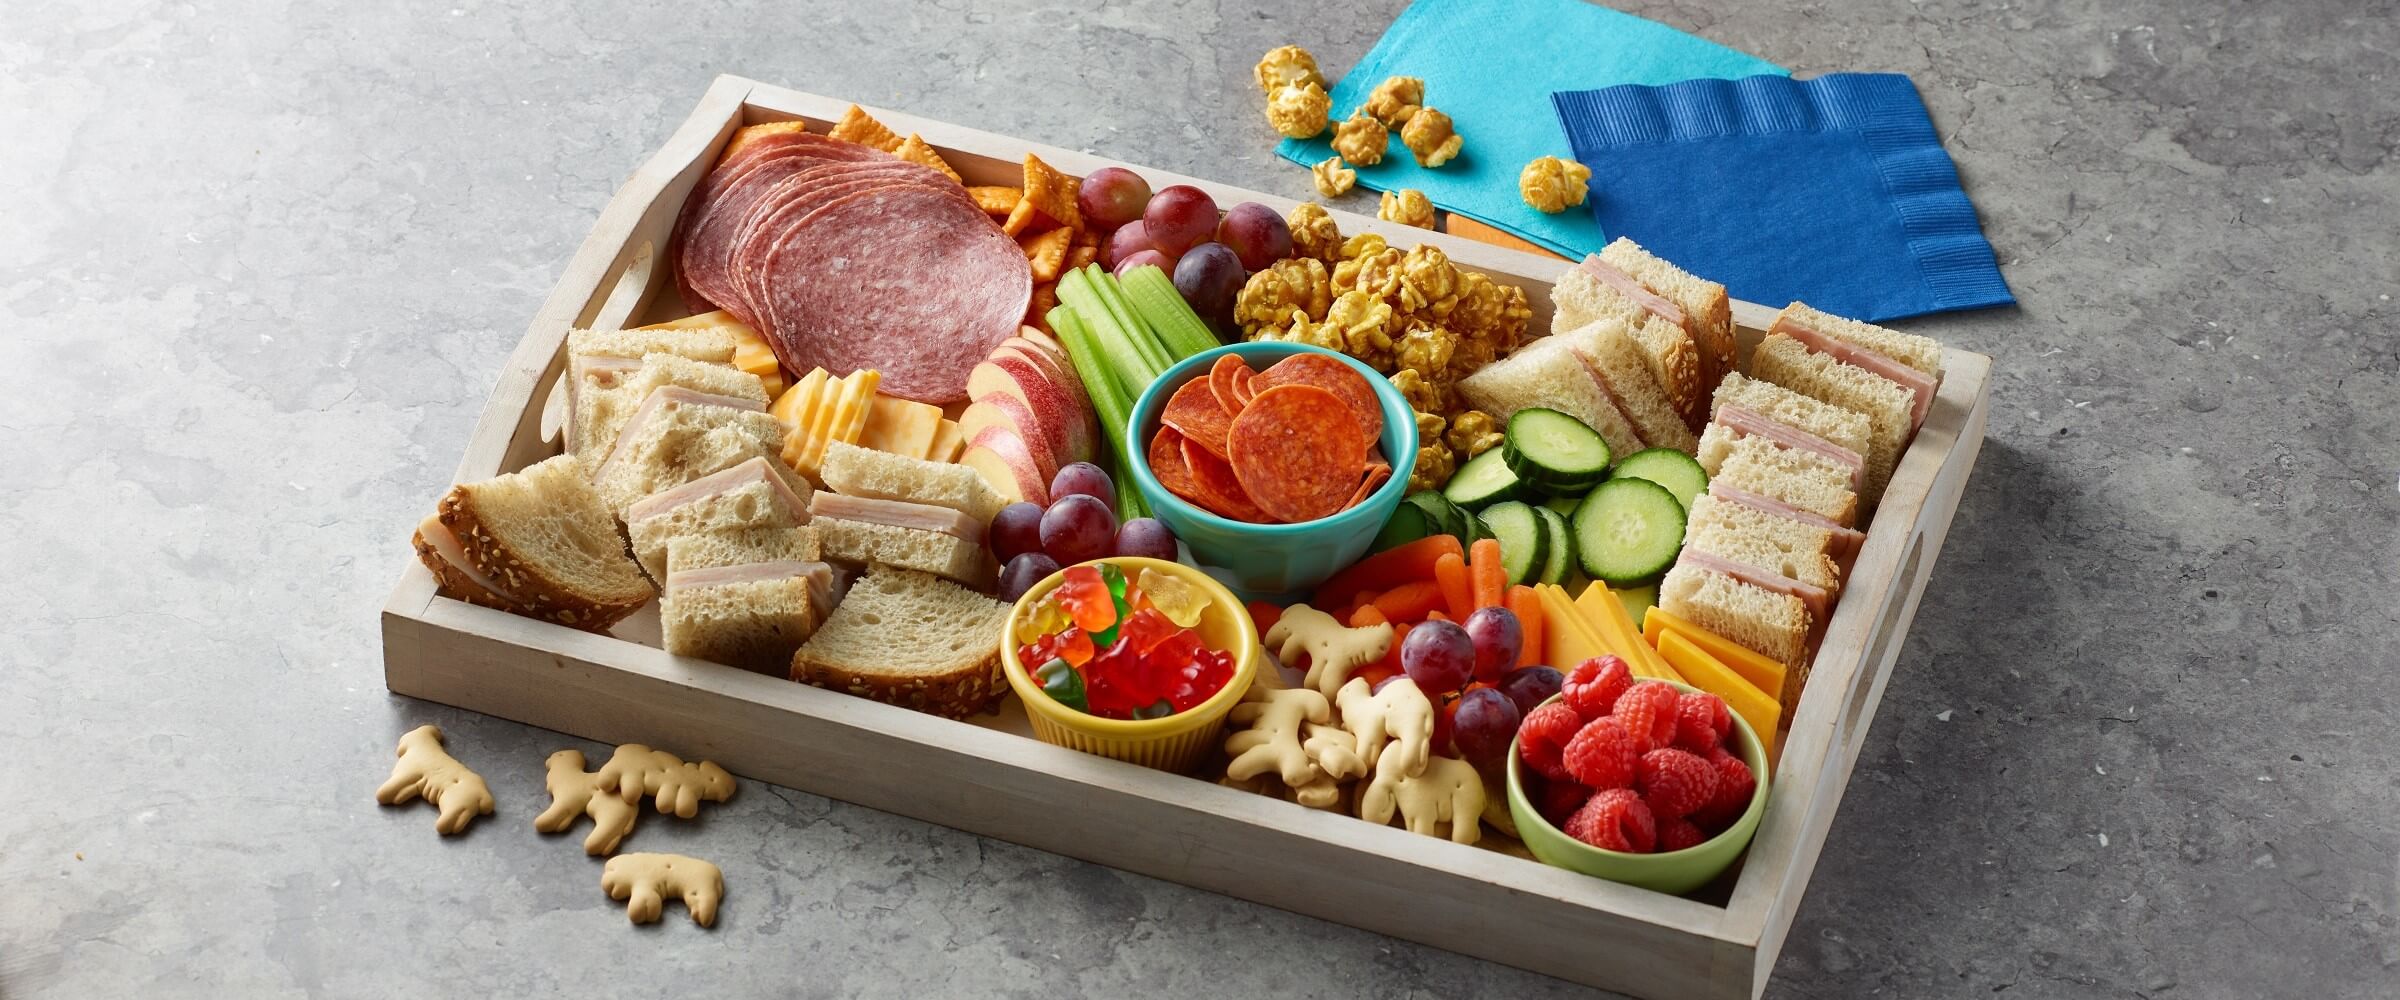 Kids charcuterie board with mini sandwiches, crackers, meat, cheese, popcorn, fruit and gummy bears